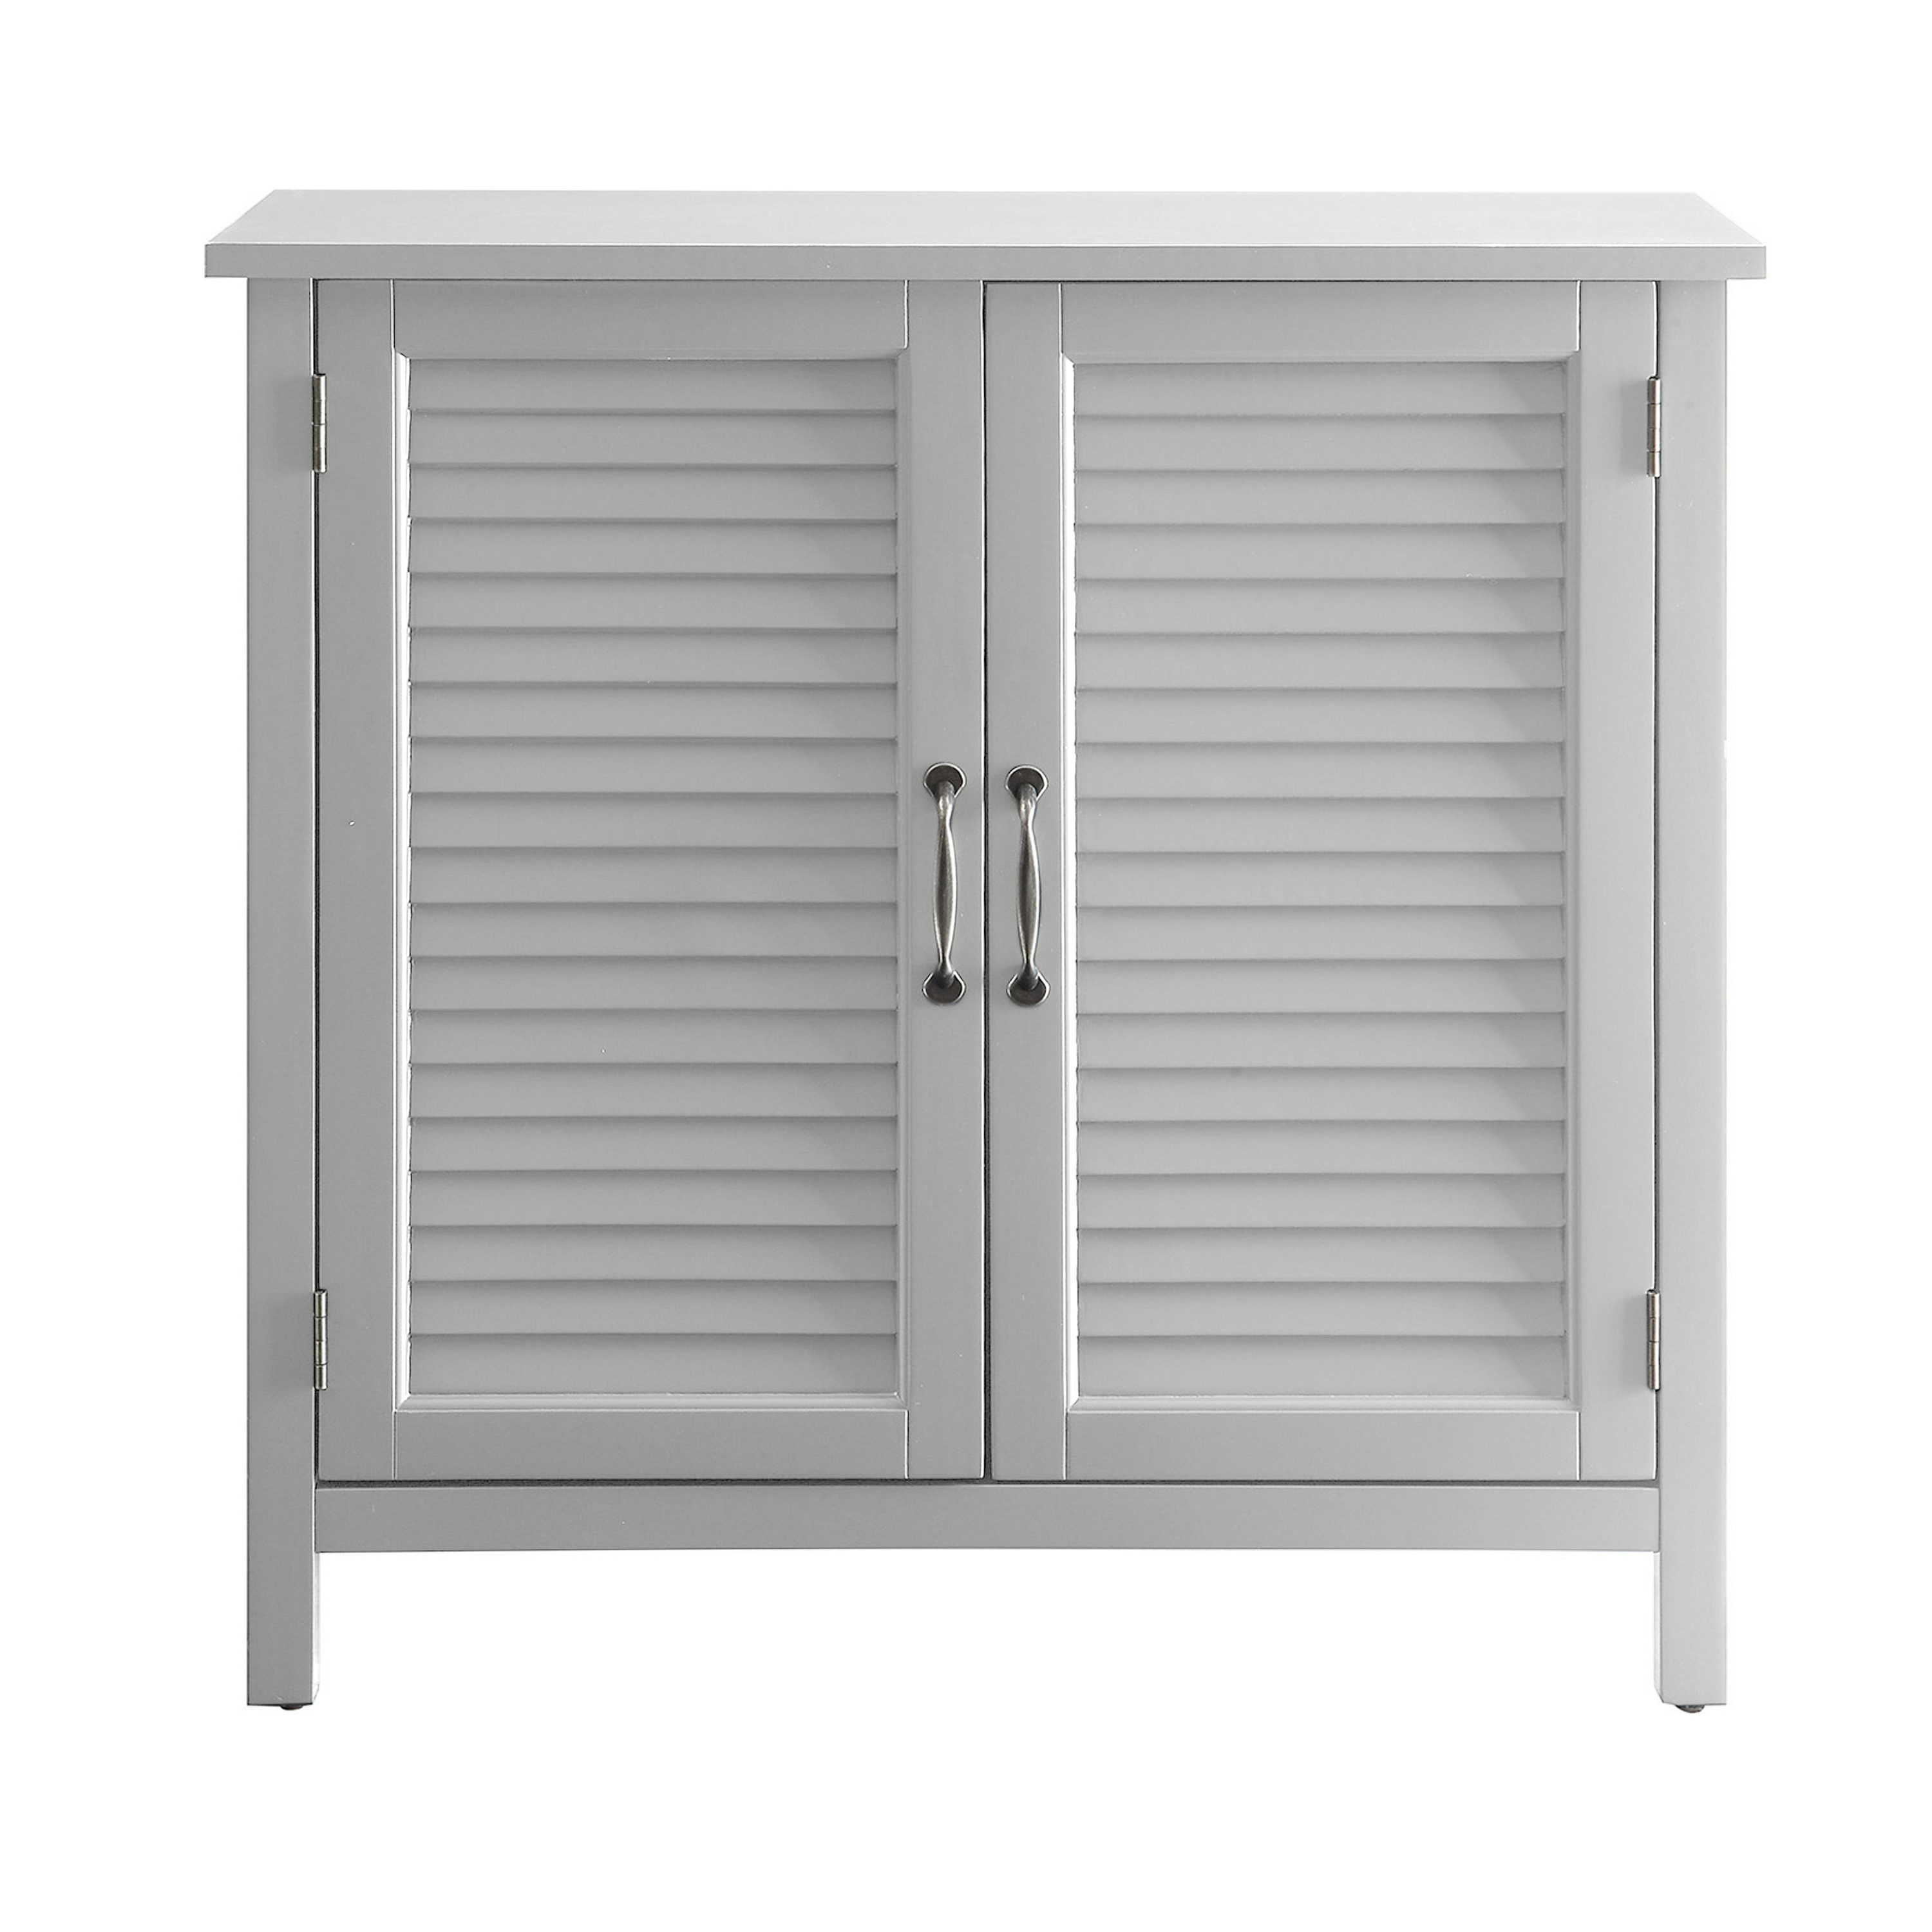 Accent Cabinet 2 Shutter Doors Transitional London Grey Wood Pine China Cabinet in Gray | - Belray Home Furnishings & Decor LBF19087C5-LG